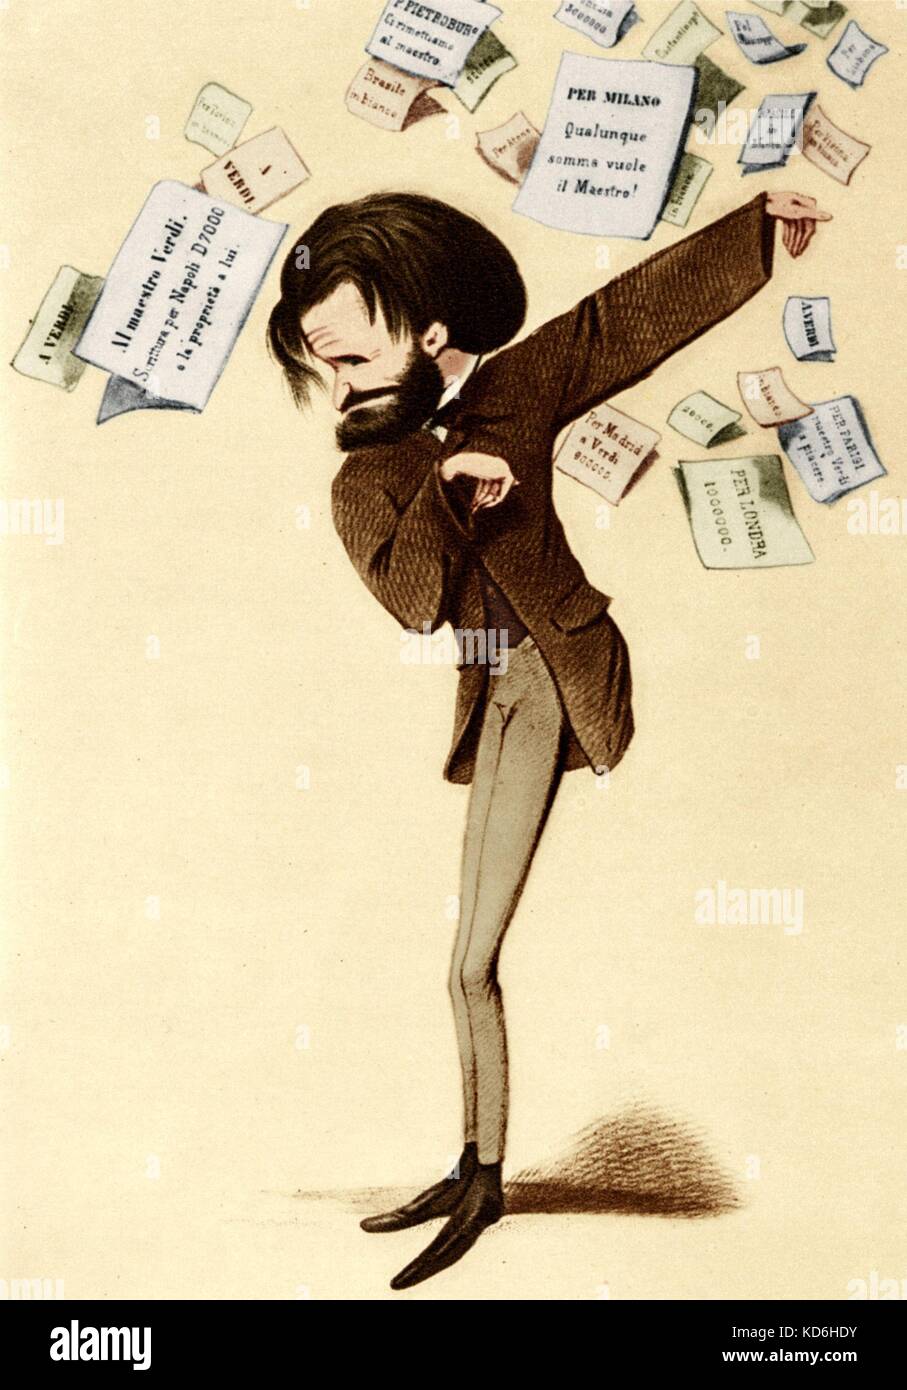 Caricature of VERDI 'Proposte di nuove scritture' Also captioned 'Verdi schiacciato dagli impegni' (Verdi crushed by commissions) Shows papers from Milan, London, Madrid with sums of money. Caricature by Delfico. Italian composer (1813-1901). Stock Photo